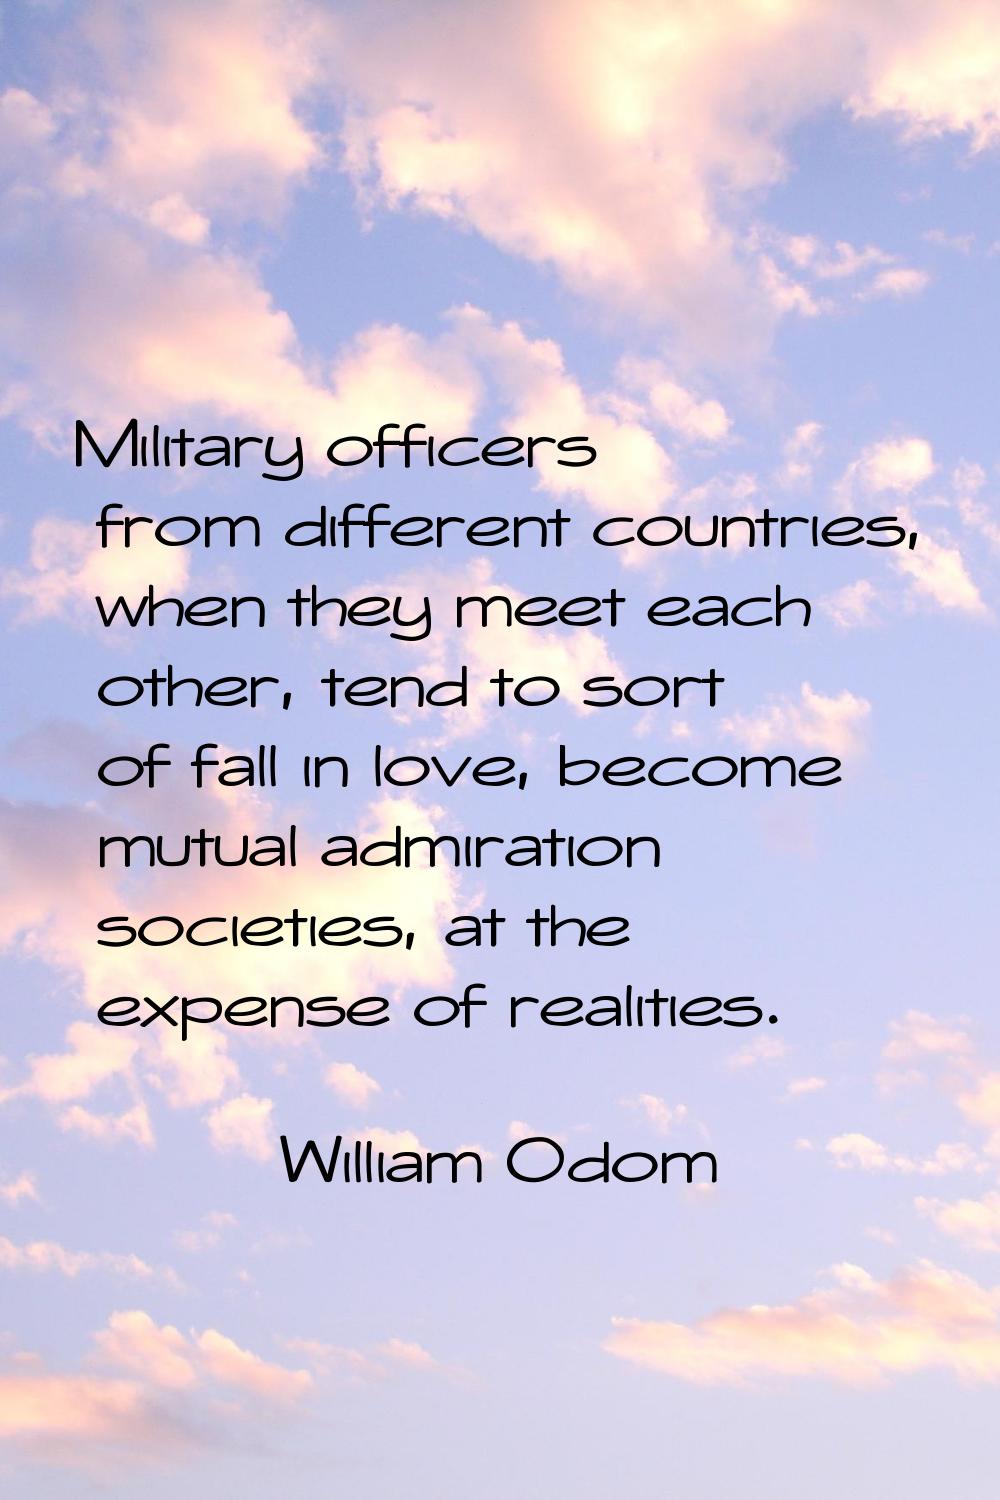 Military officers from different countries, when they meet each other, tend to sort of fall in love